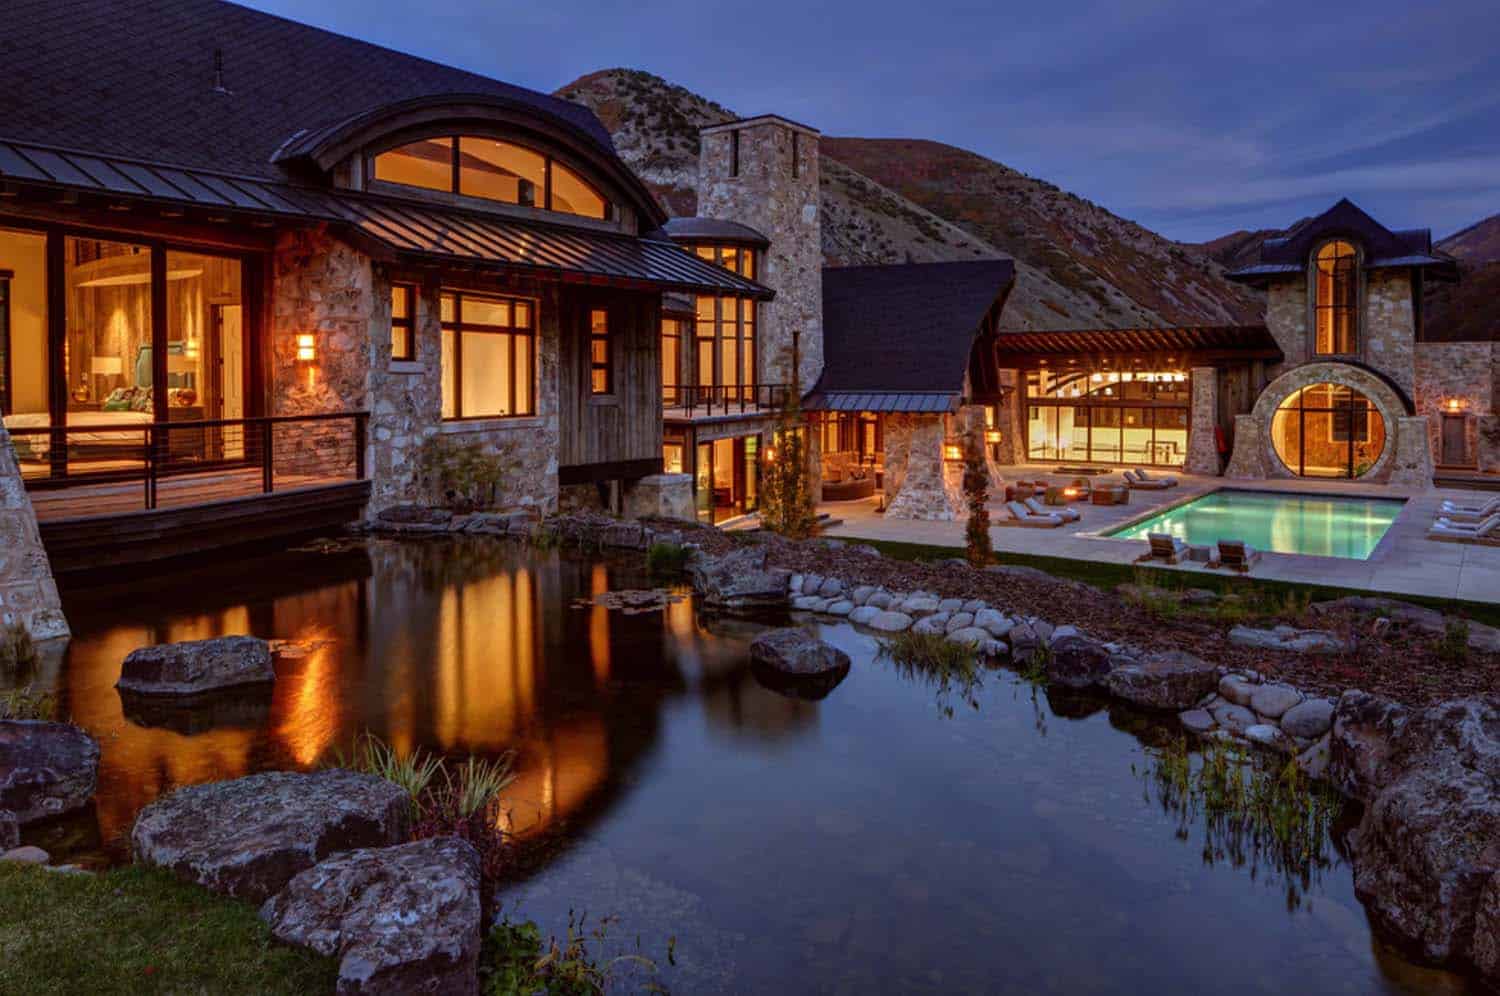 Insane mountain dream home with views of the Wasatch Range, Utah